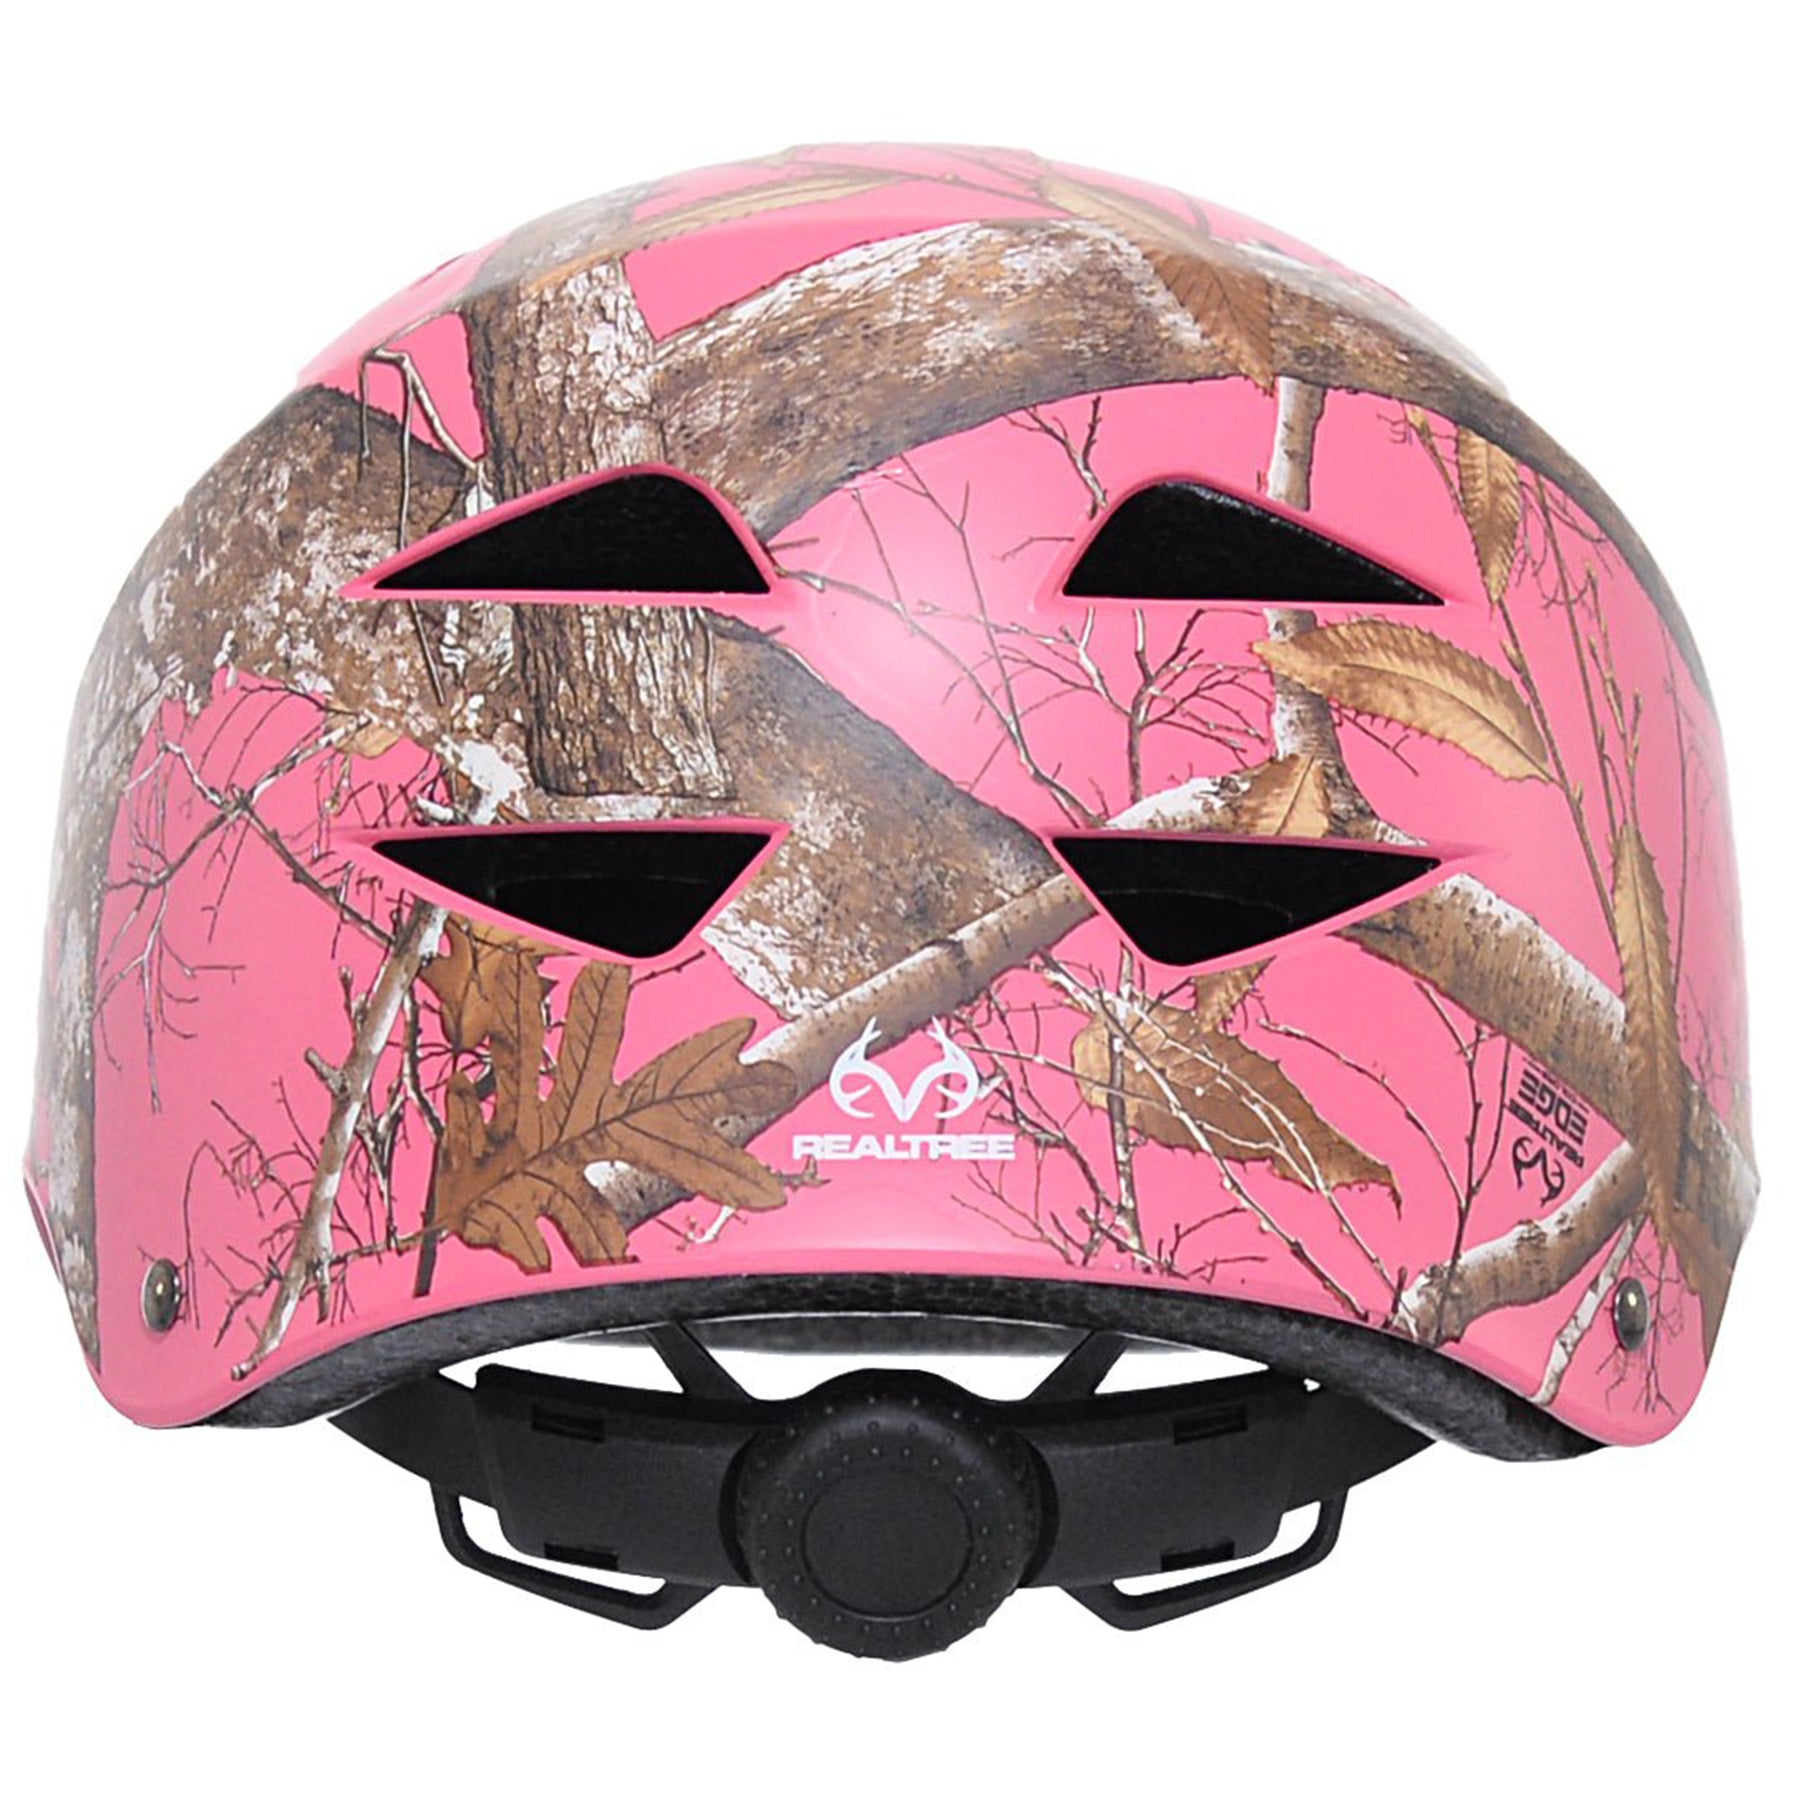 RealTree™ Pink Winter Camo Youth Multi-Sport Helmet | Helmet for Kids Ages 8+